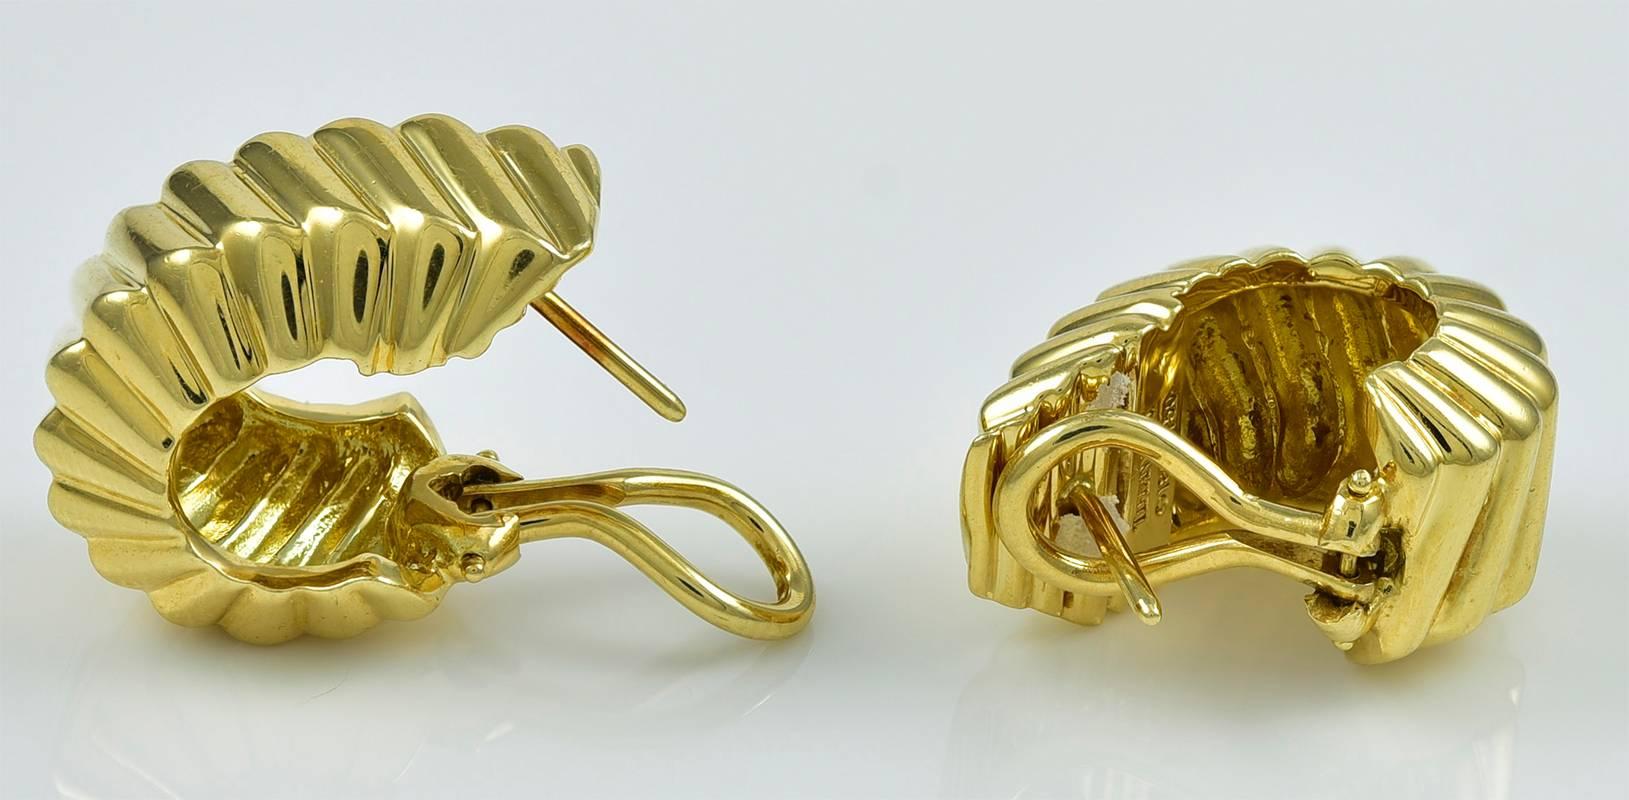 Very attractive 18K yellow gold ear clips  Made and signed by TIFFANY & CO.  18K yellow heavy gauge gold.  Beveled on front, back and sides.  Allover diagonal ribbed pattern.  Omega clips with posts.  7/8